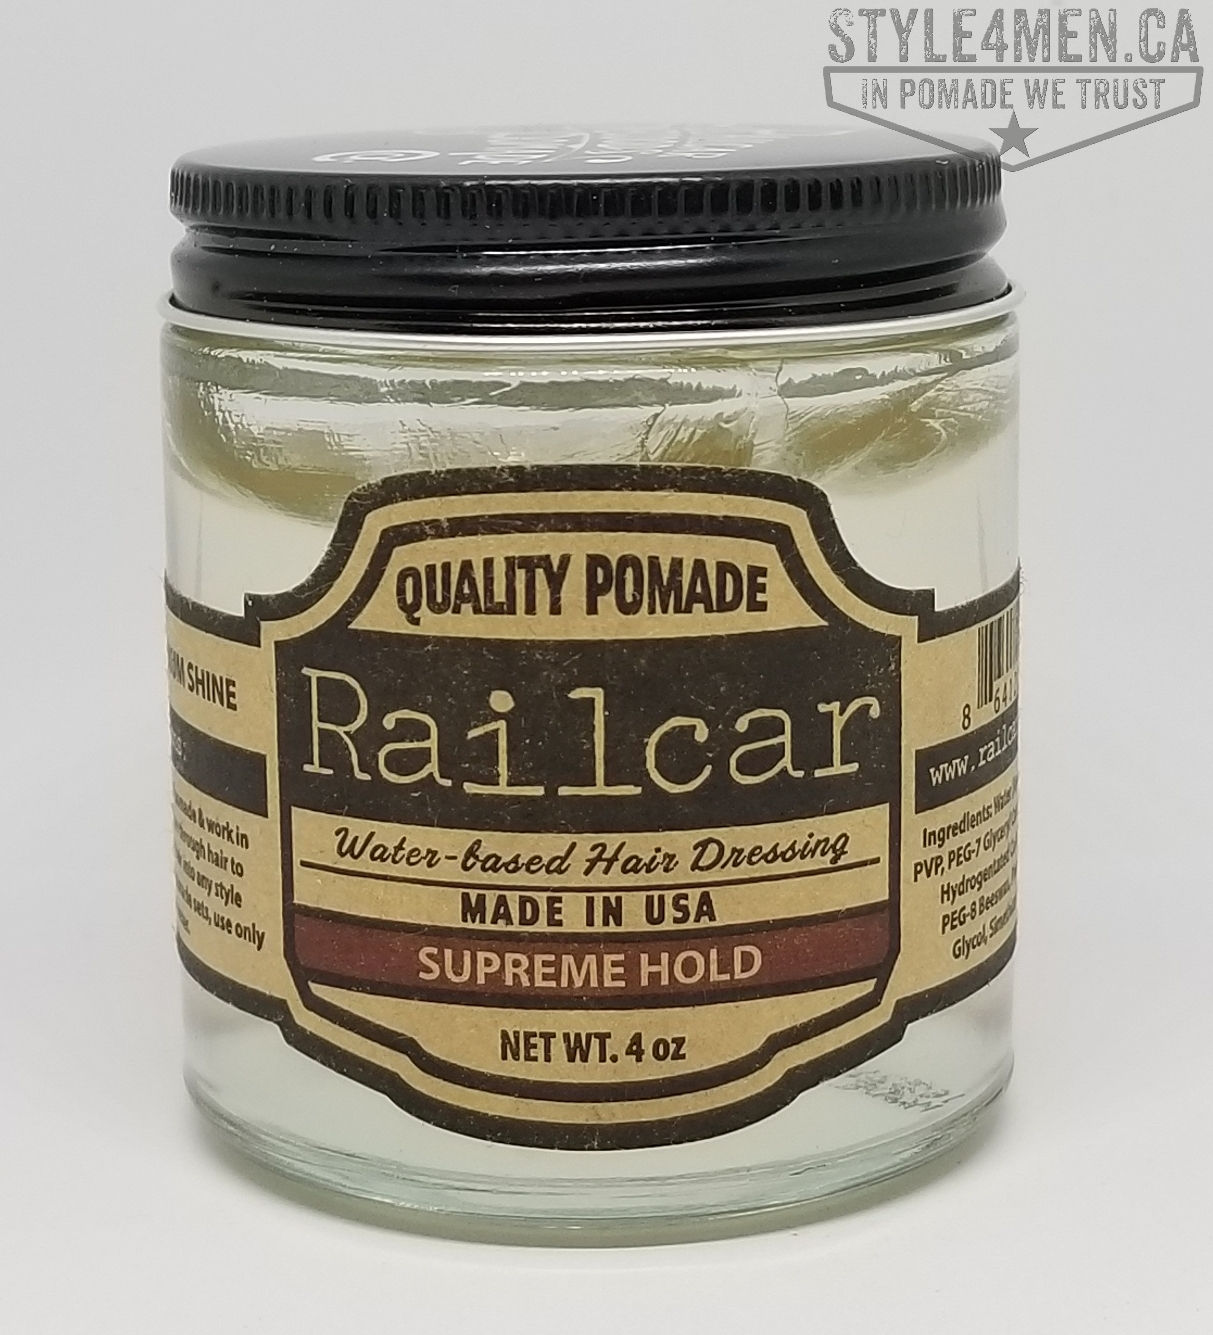 A third hit single from Railcar – Supreme Hold Pomade